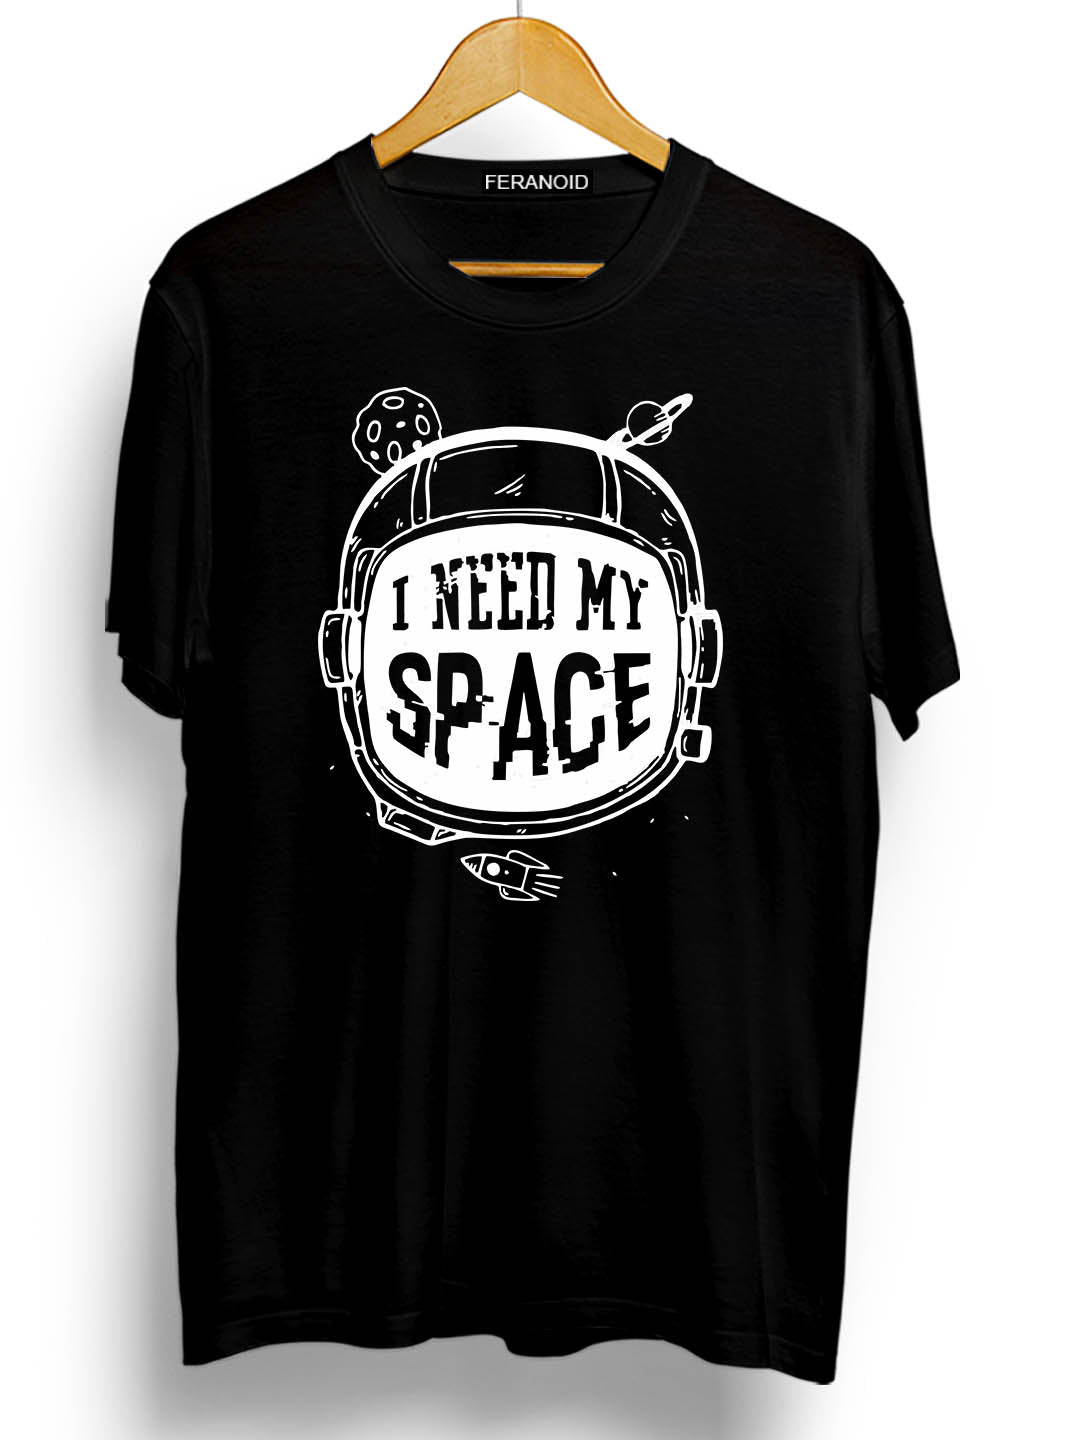 I NEED MORE SPACE T-SHIRT